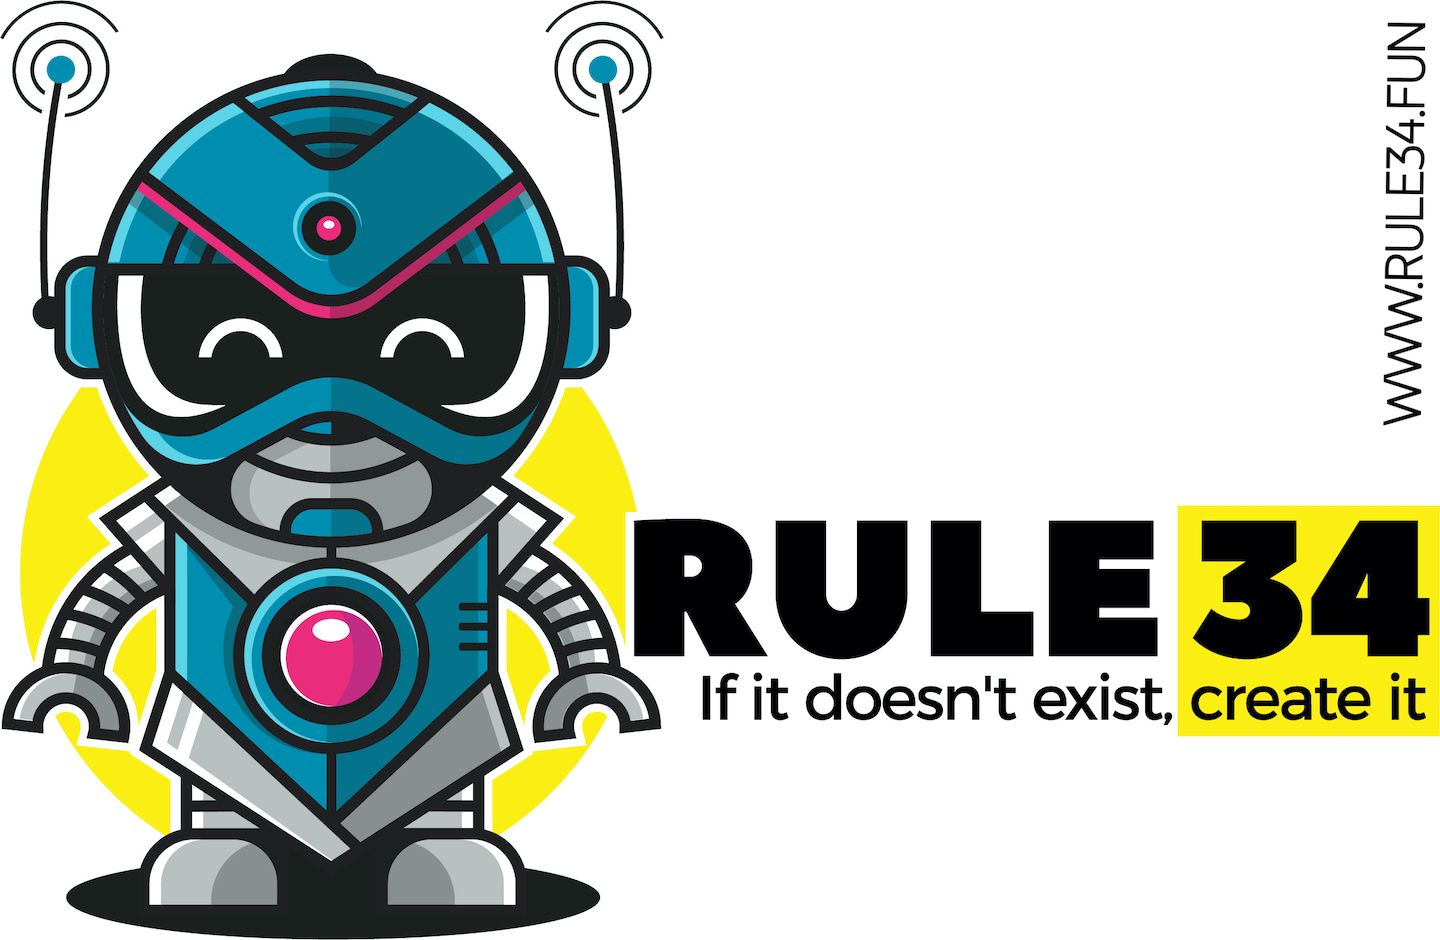 Rule 34 Web App Launches Allows Users To Create Their Own Image Boards 4270